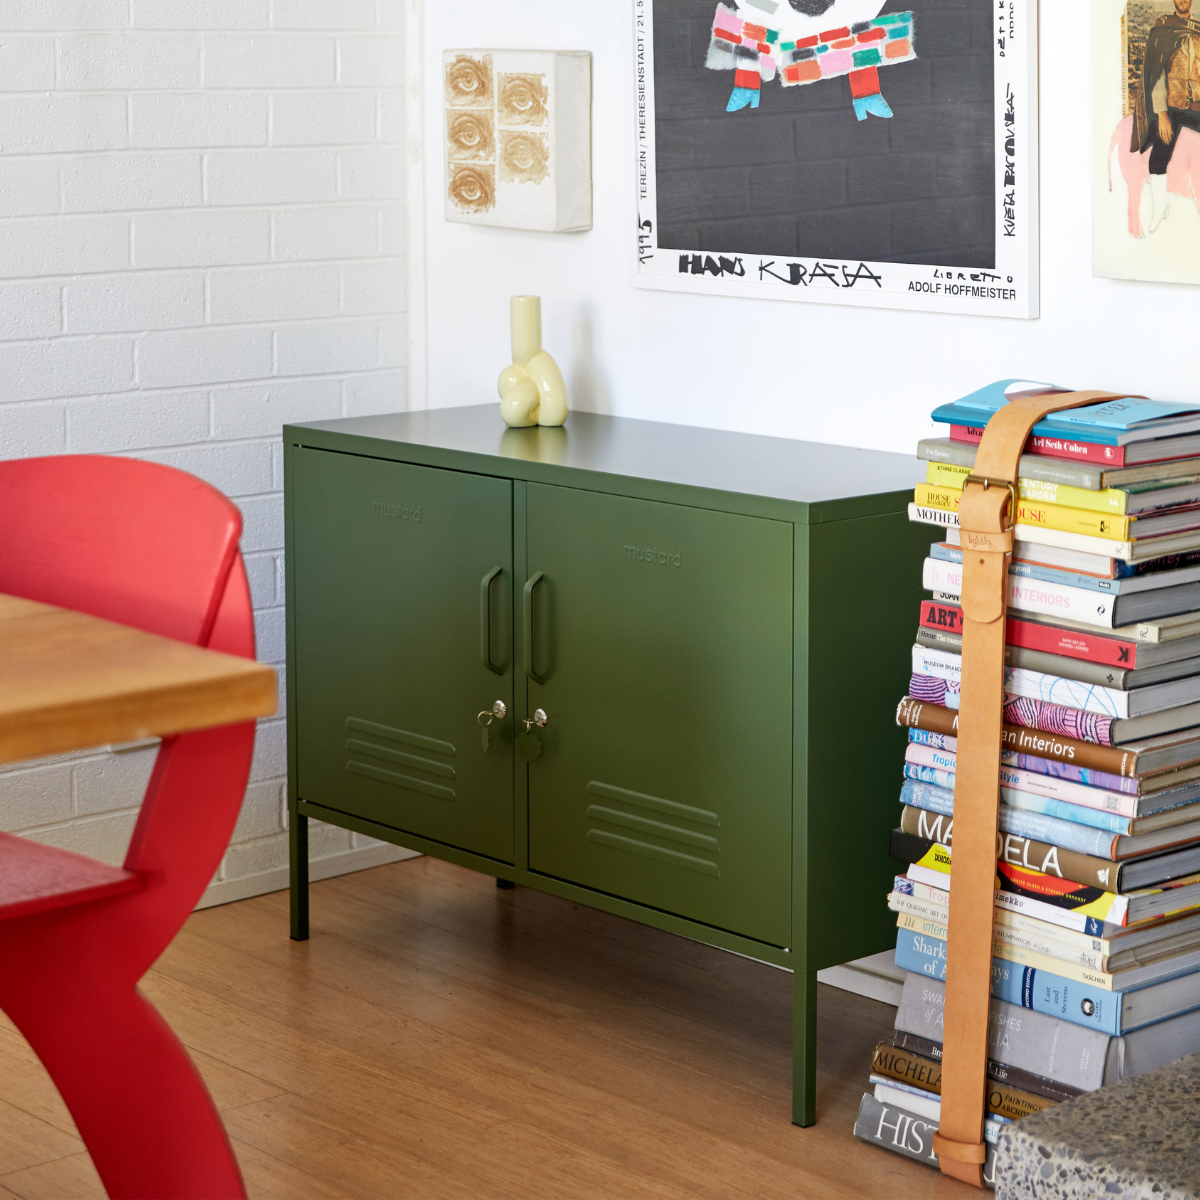 An Olive Lowdown sits next to a stack of colourful hardback books bound with a leather strap. There is bright artwork on the walls and a feature red chair.